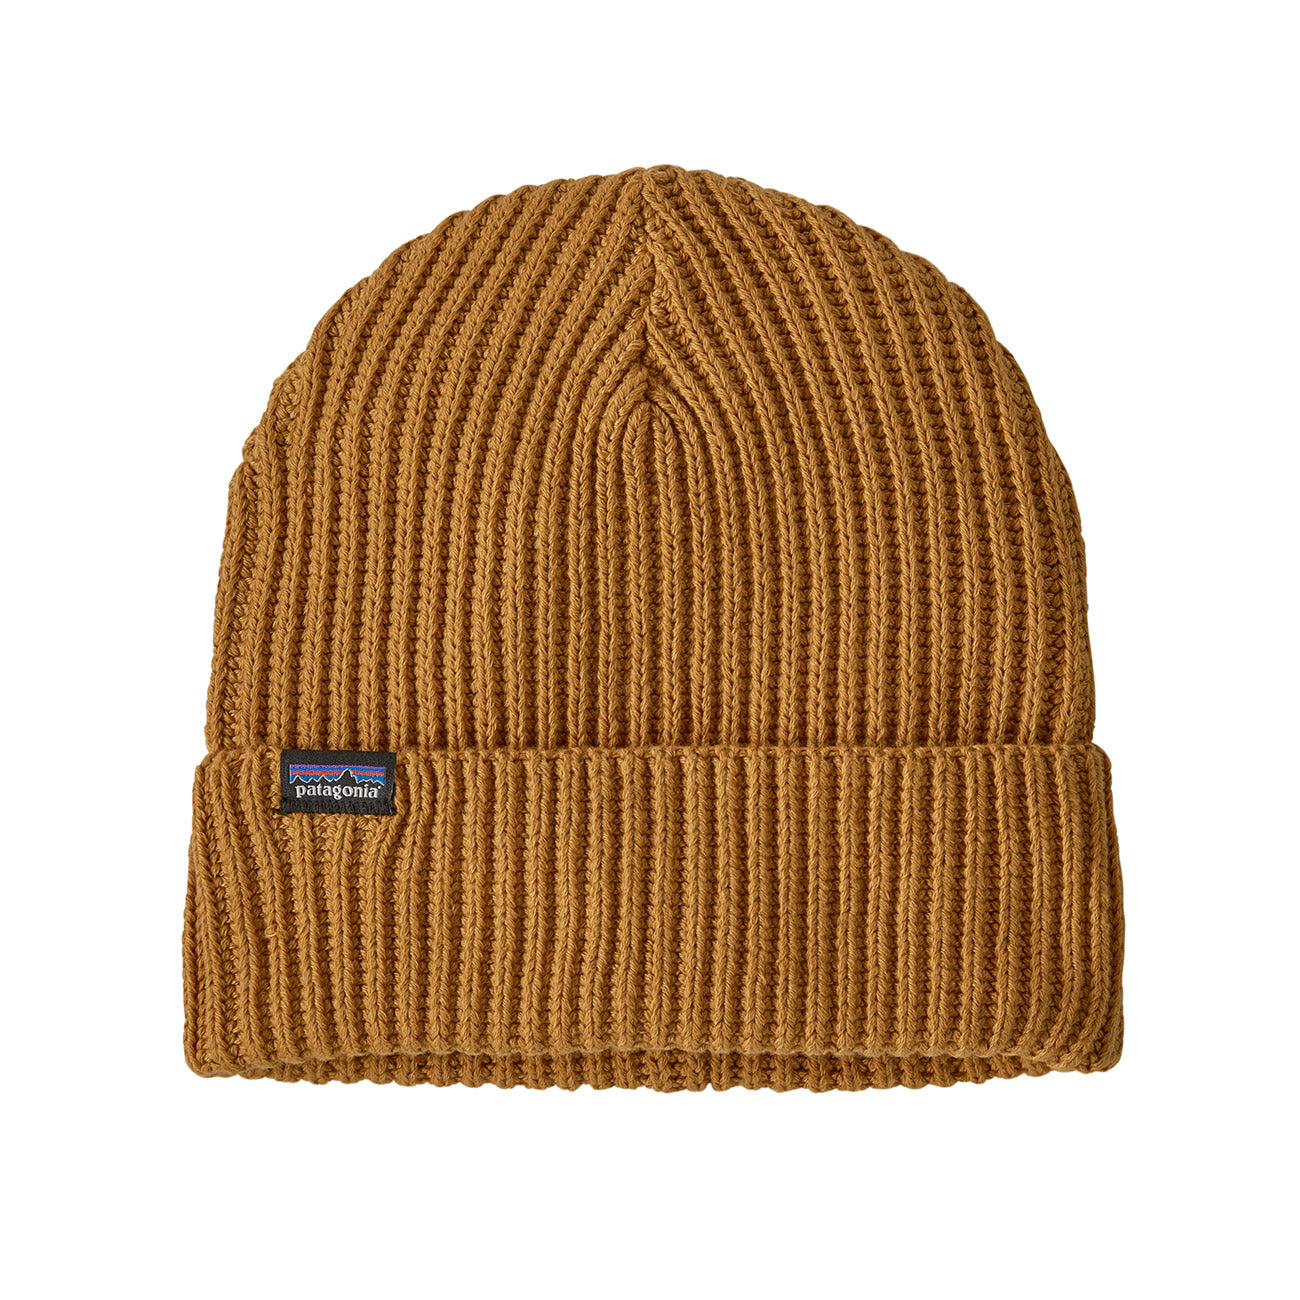 fisherman's rolled beanie in gold